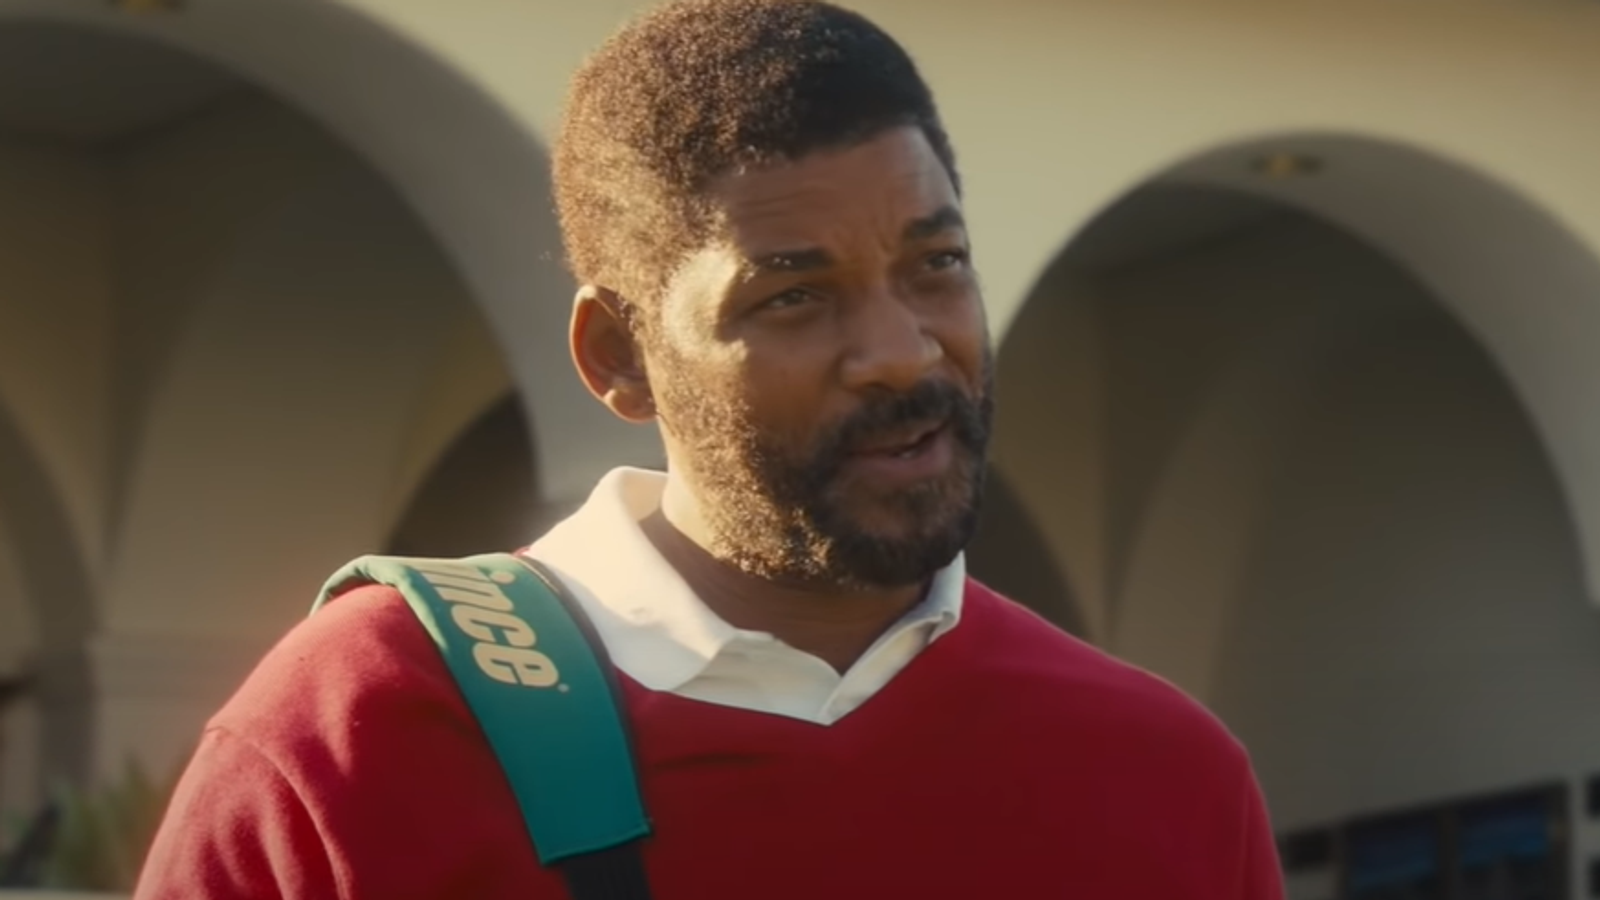 Will Smith in new film trailer for King Richard as father of Venus and